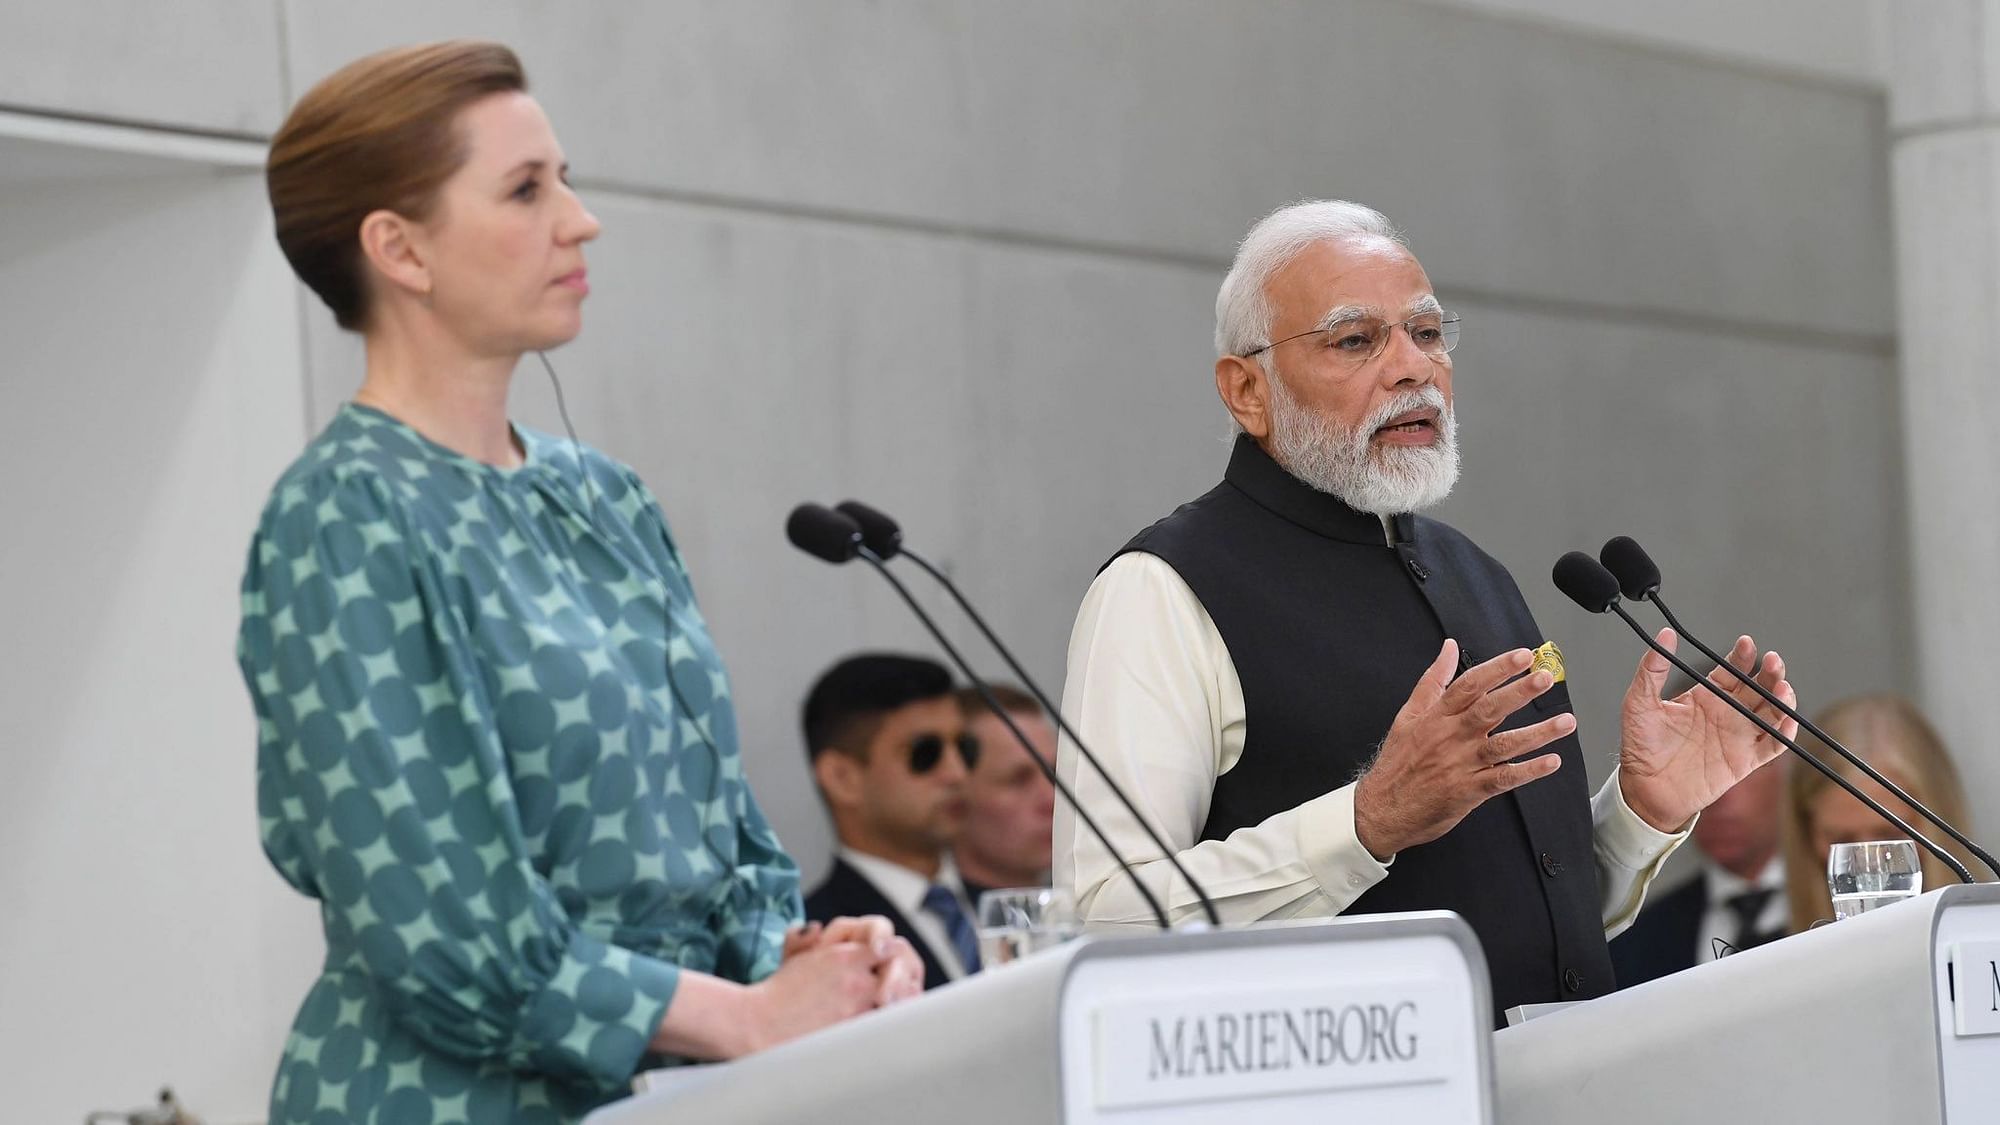 <div class="paragraphs"><p><a href="https://www.thequint.com/topic/prime-minister-narendra-modi">Prime Minister Narendra Modi</a> held delegation-level talks with Danish Prime Minister Mette Frederiksen soon after his arrival in Copenhagen, Denmark, on Tuesday, 3 May.</p></div>